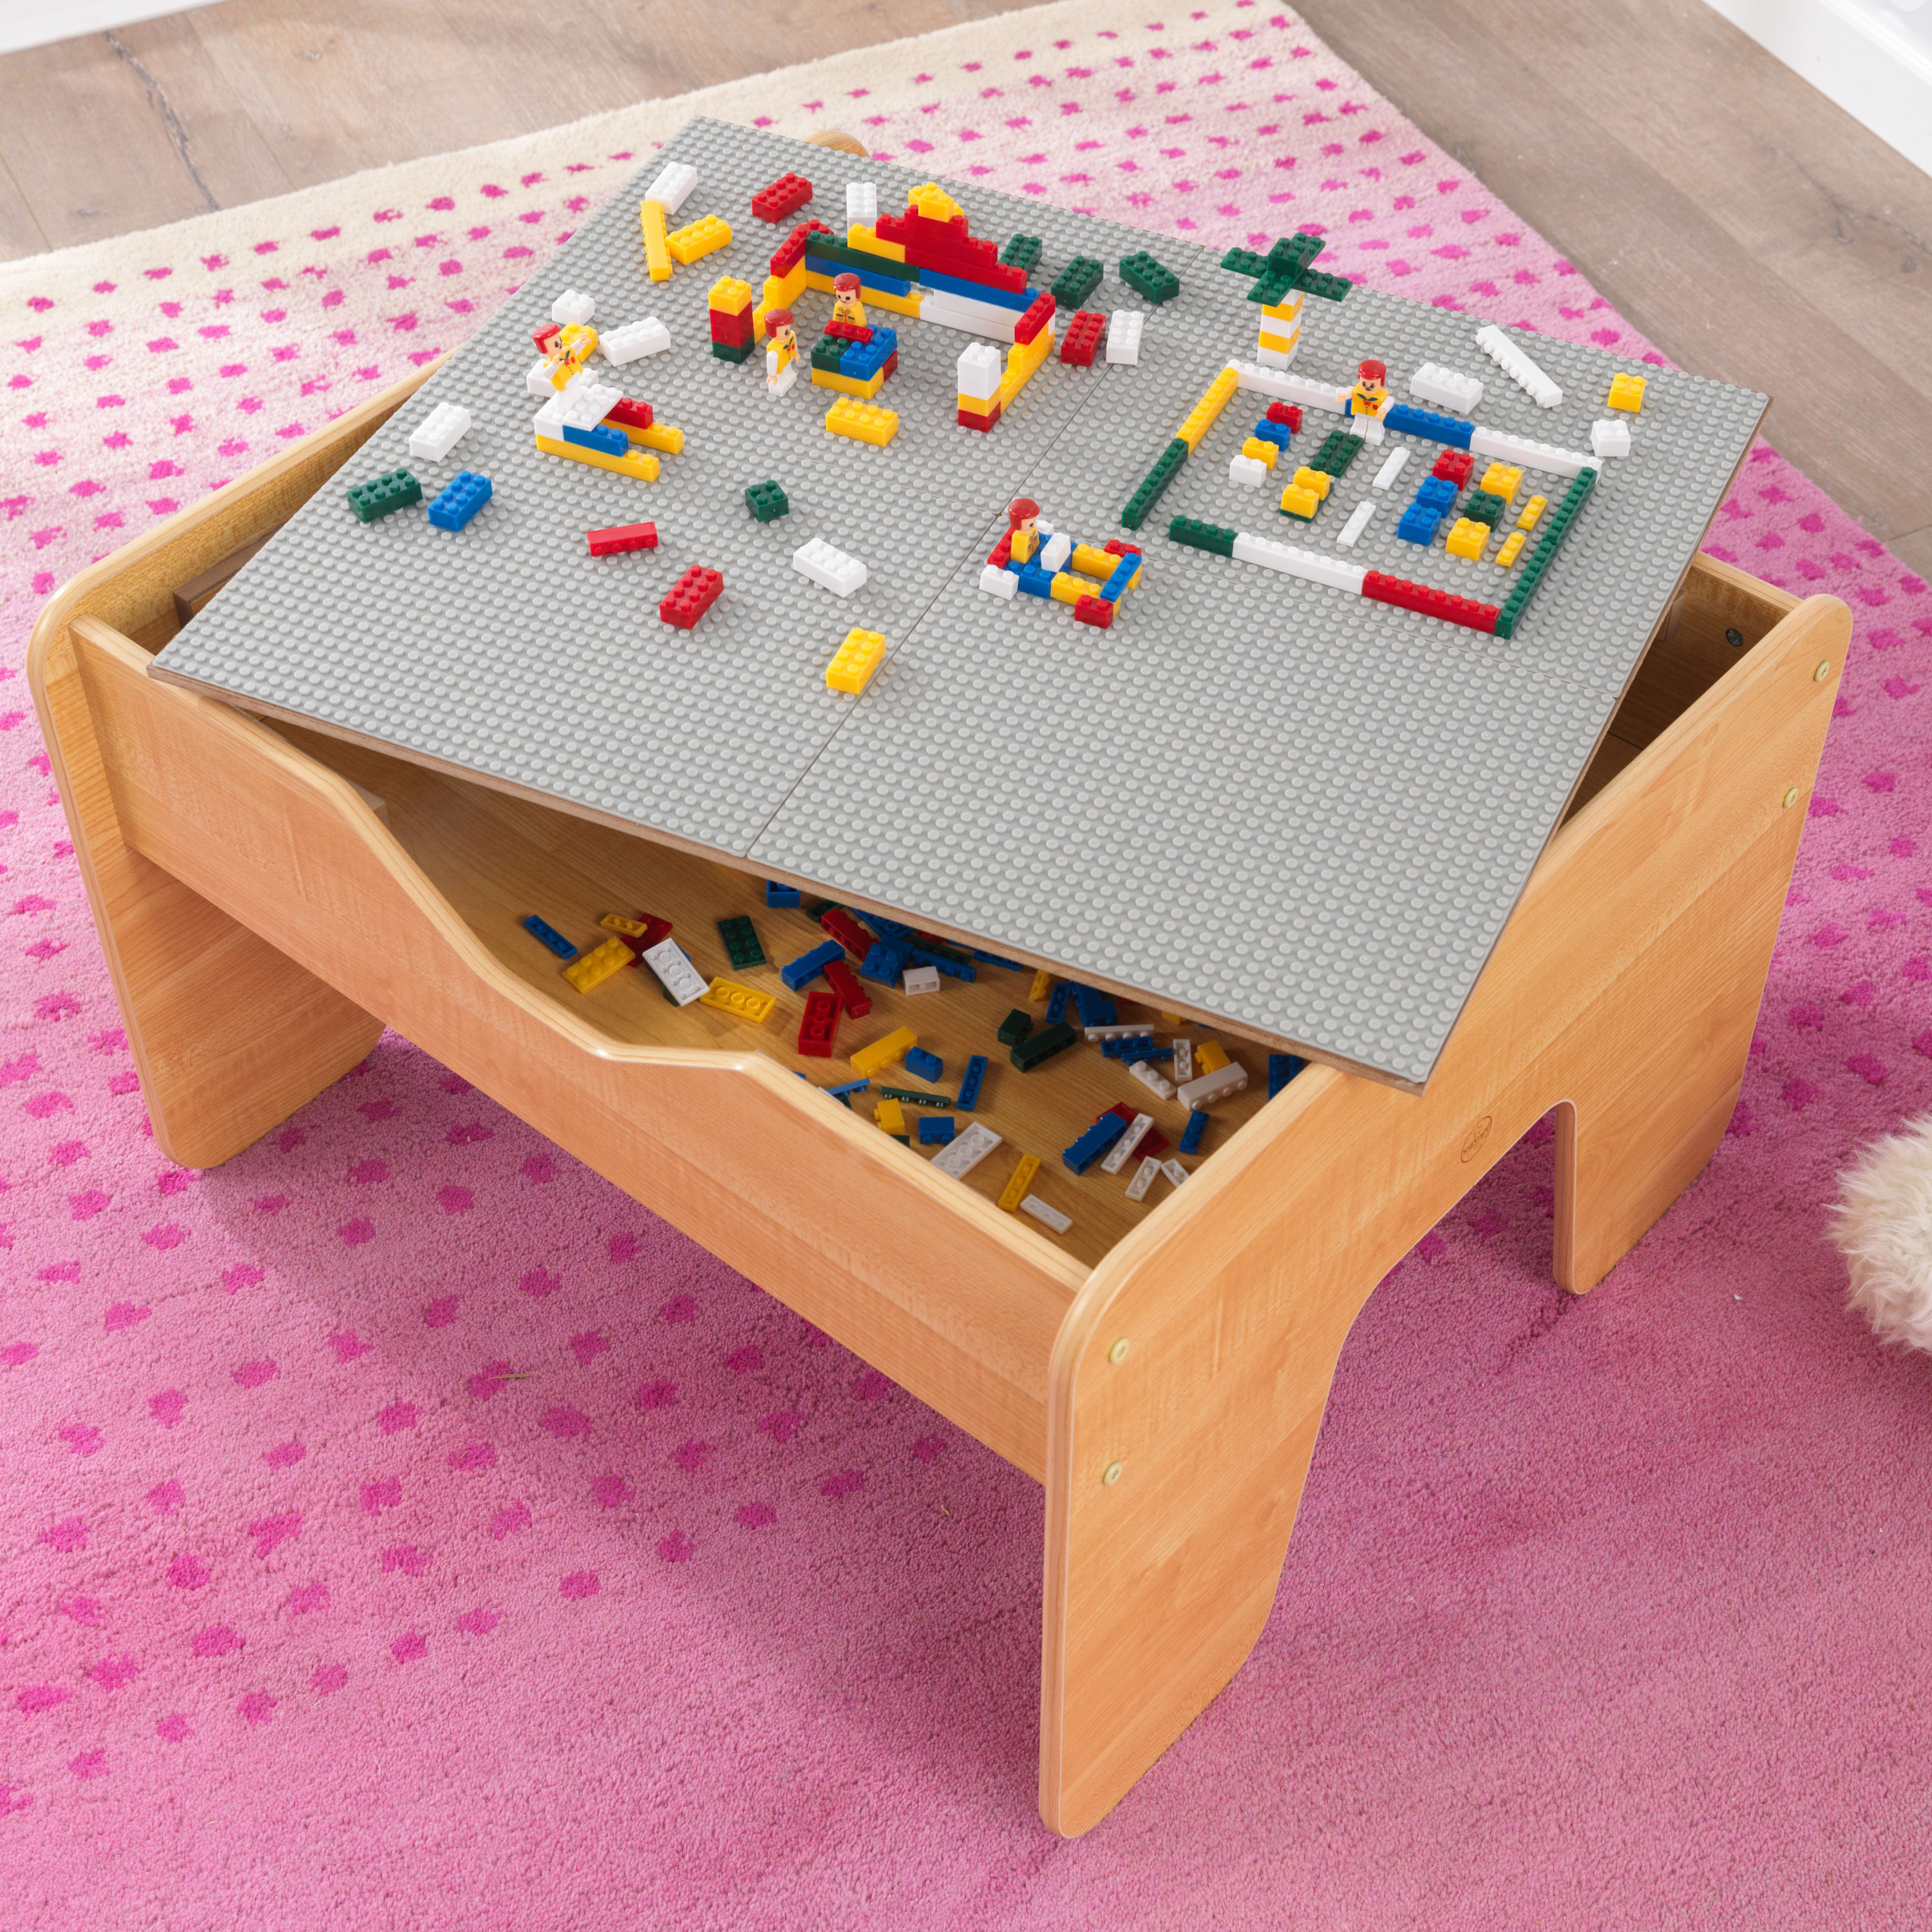 KidKraft Reversible Wooden Activity Table with 195 Building Bricks – Gray & Natural, For Ages 3+ - image 3 of 10